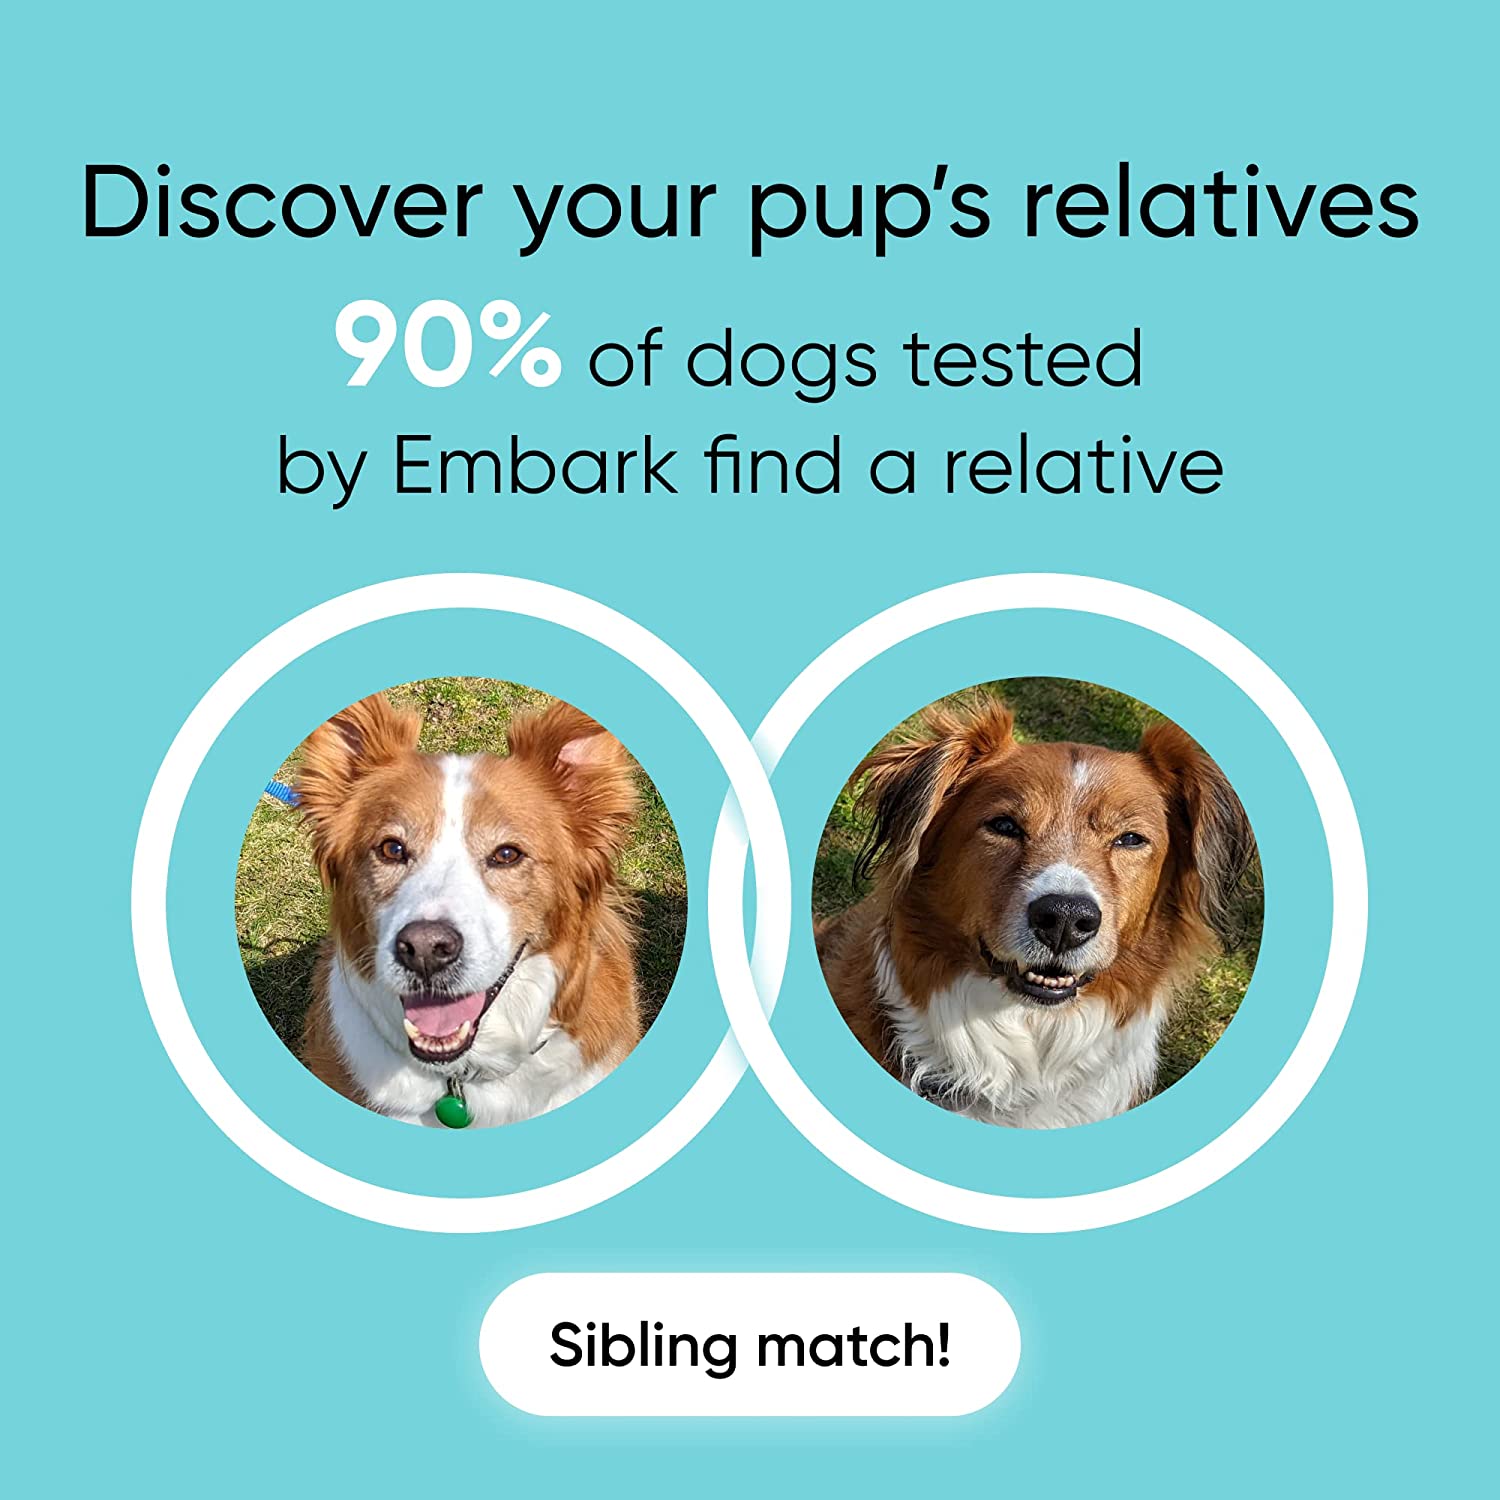 A DNA dog test kit made by Embark.